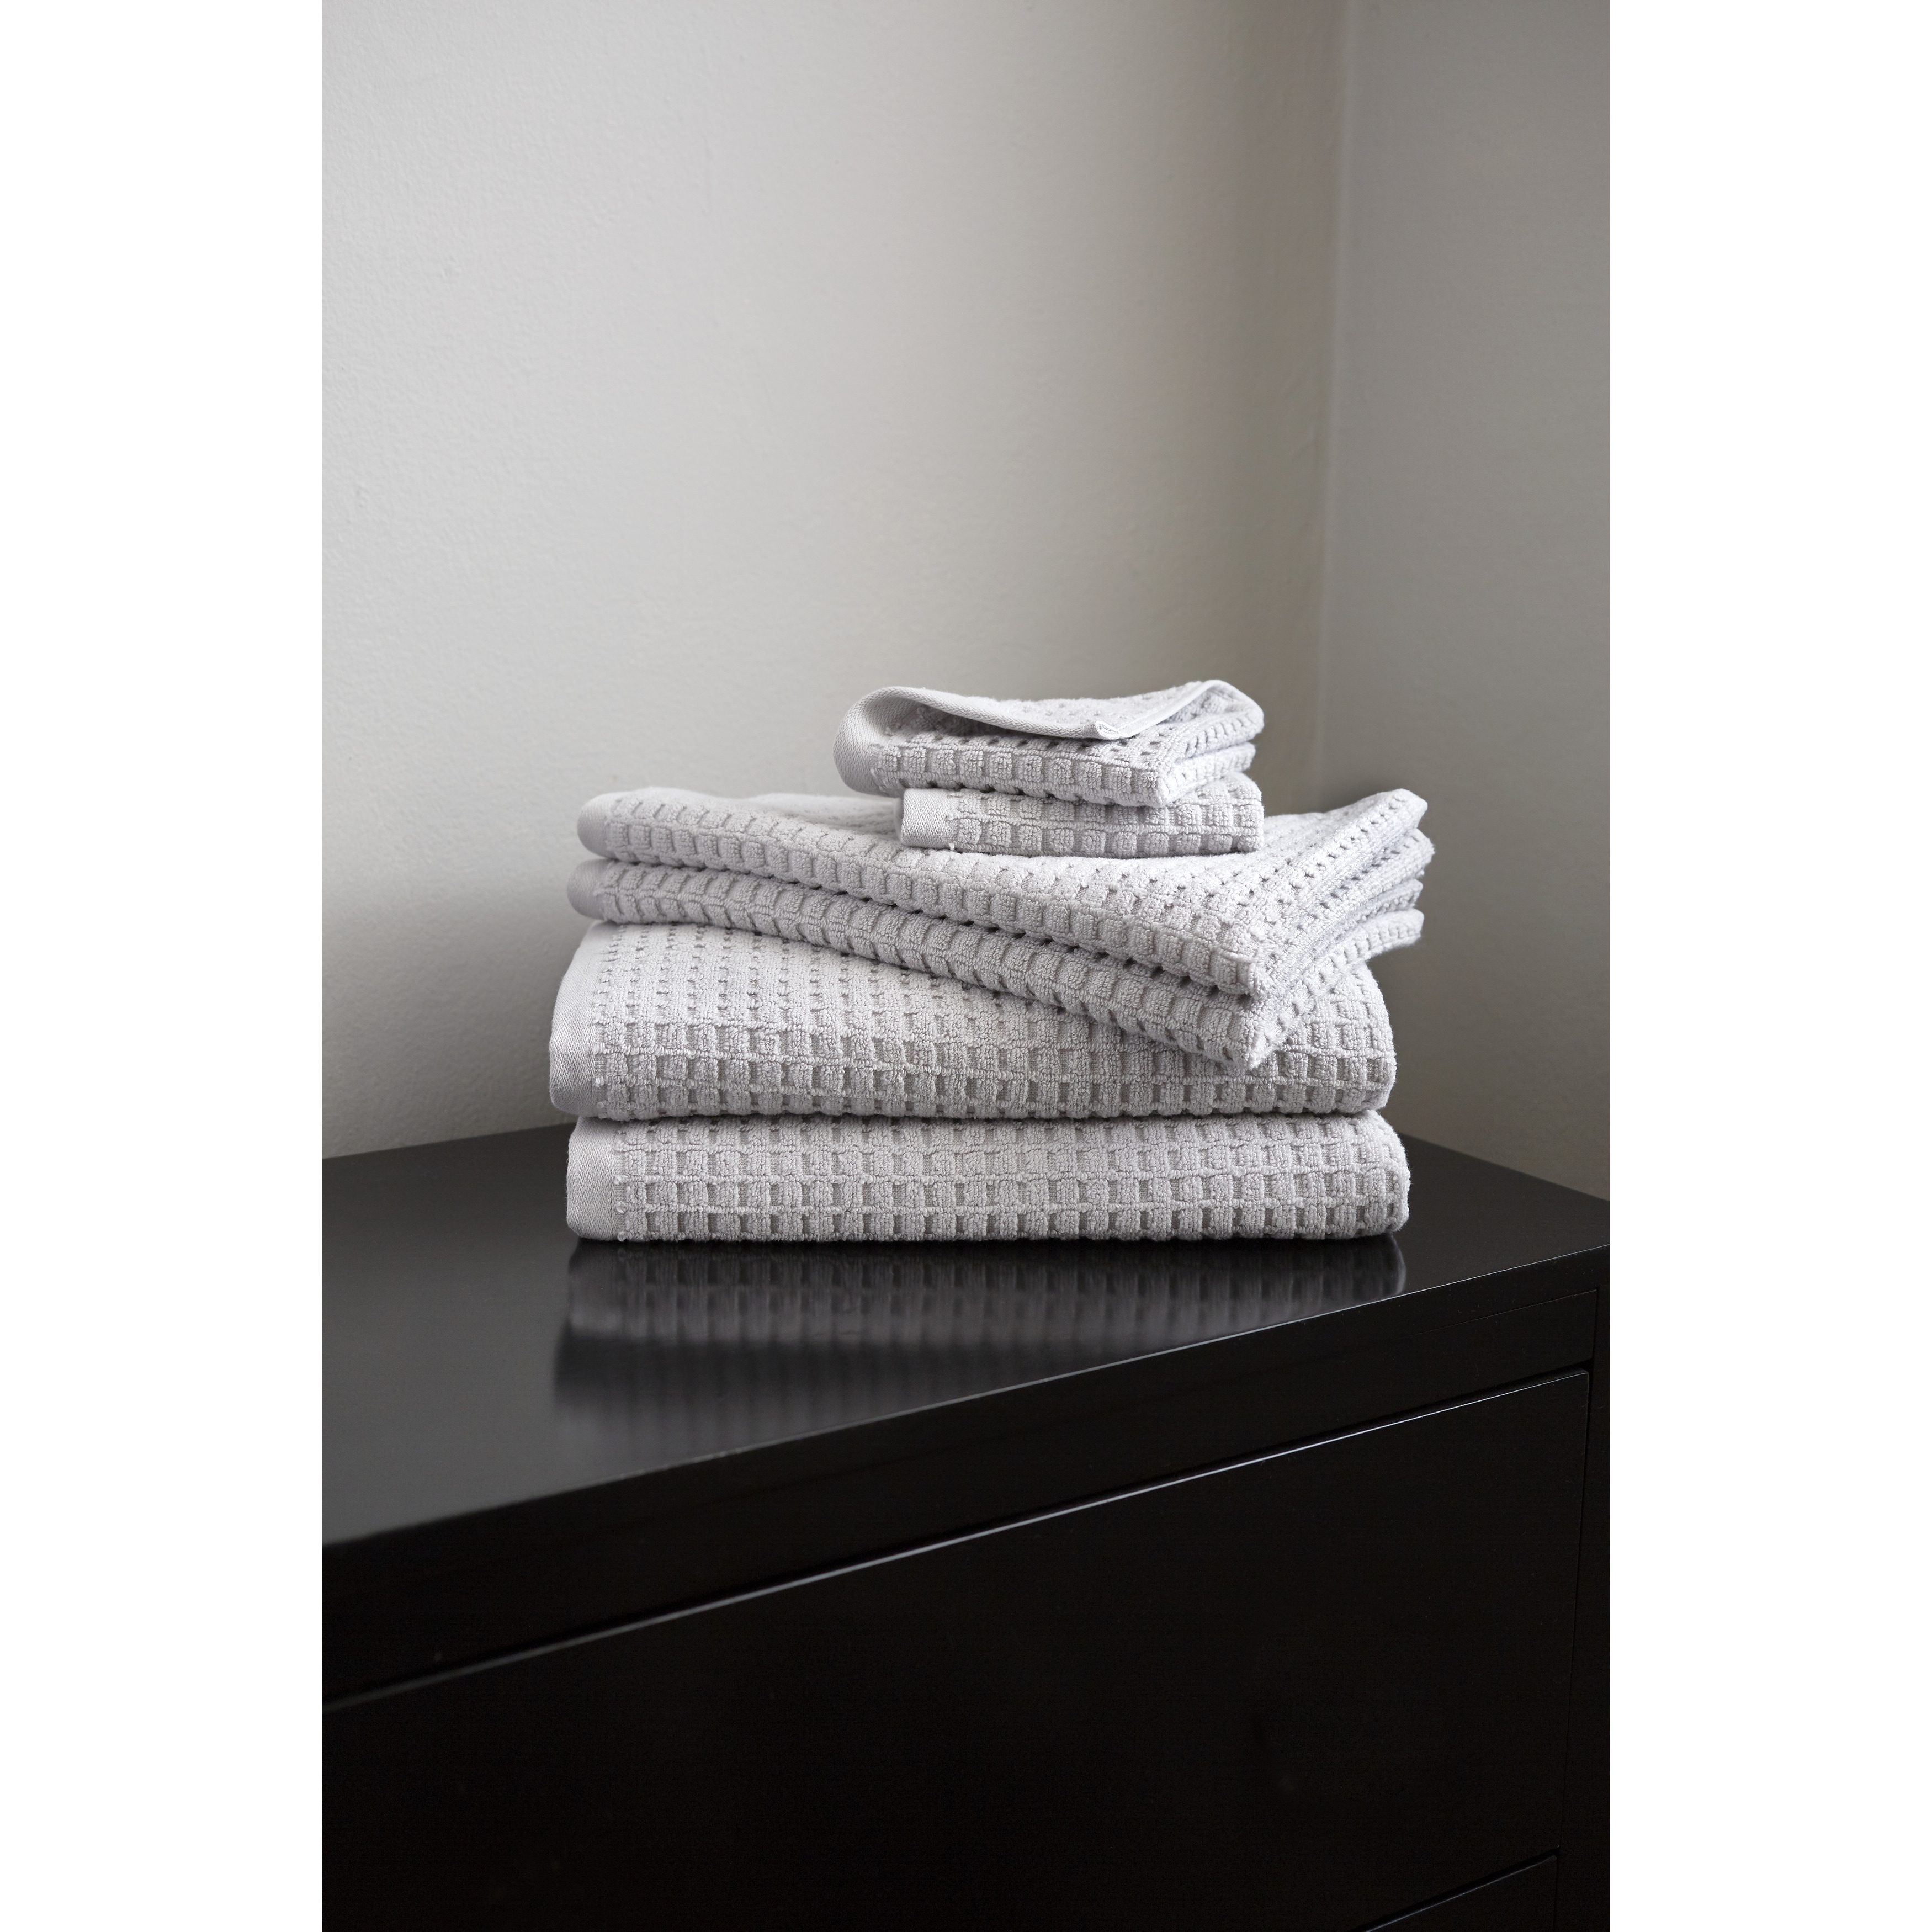 https://ak1.ostkcdn.com/images/products/is/images/direct/86b67880725b05b797be37a88c3656be9bef4460/DKNY-Quick-Dry-6-pc-Towel-Set.jpg